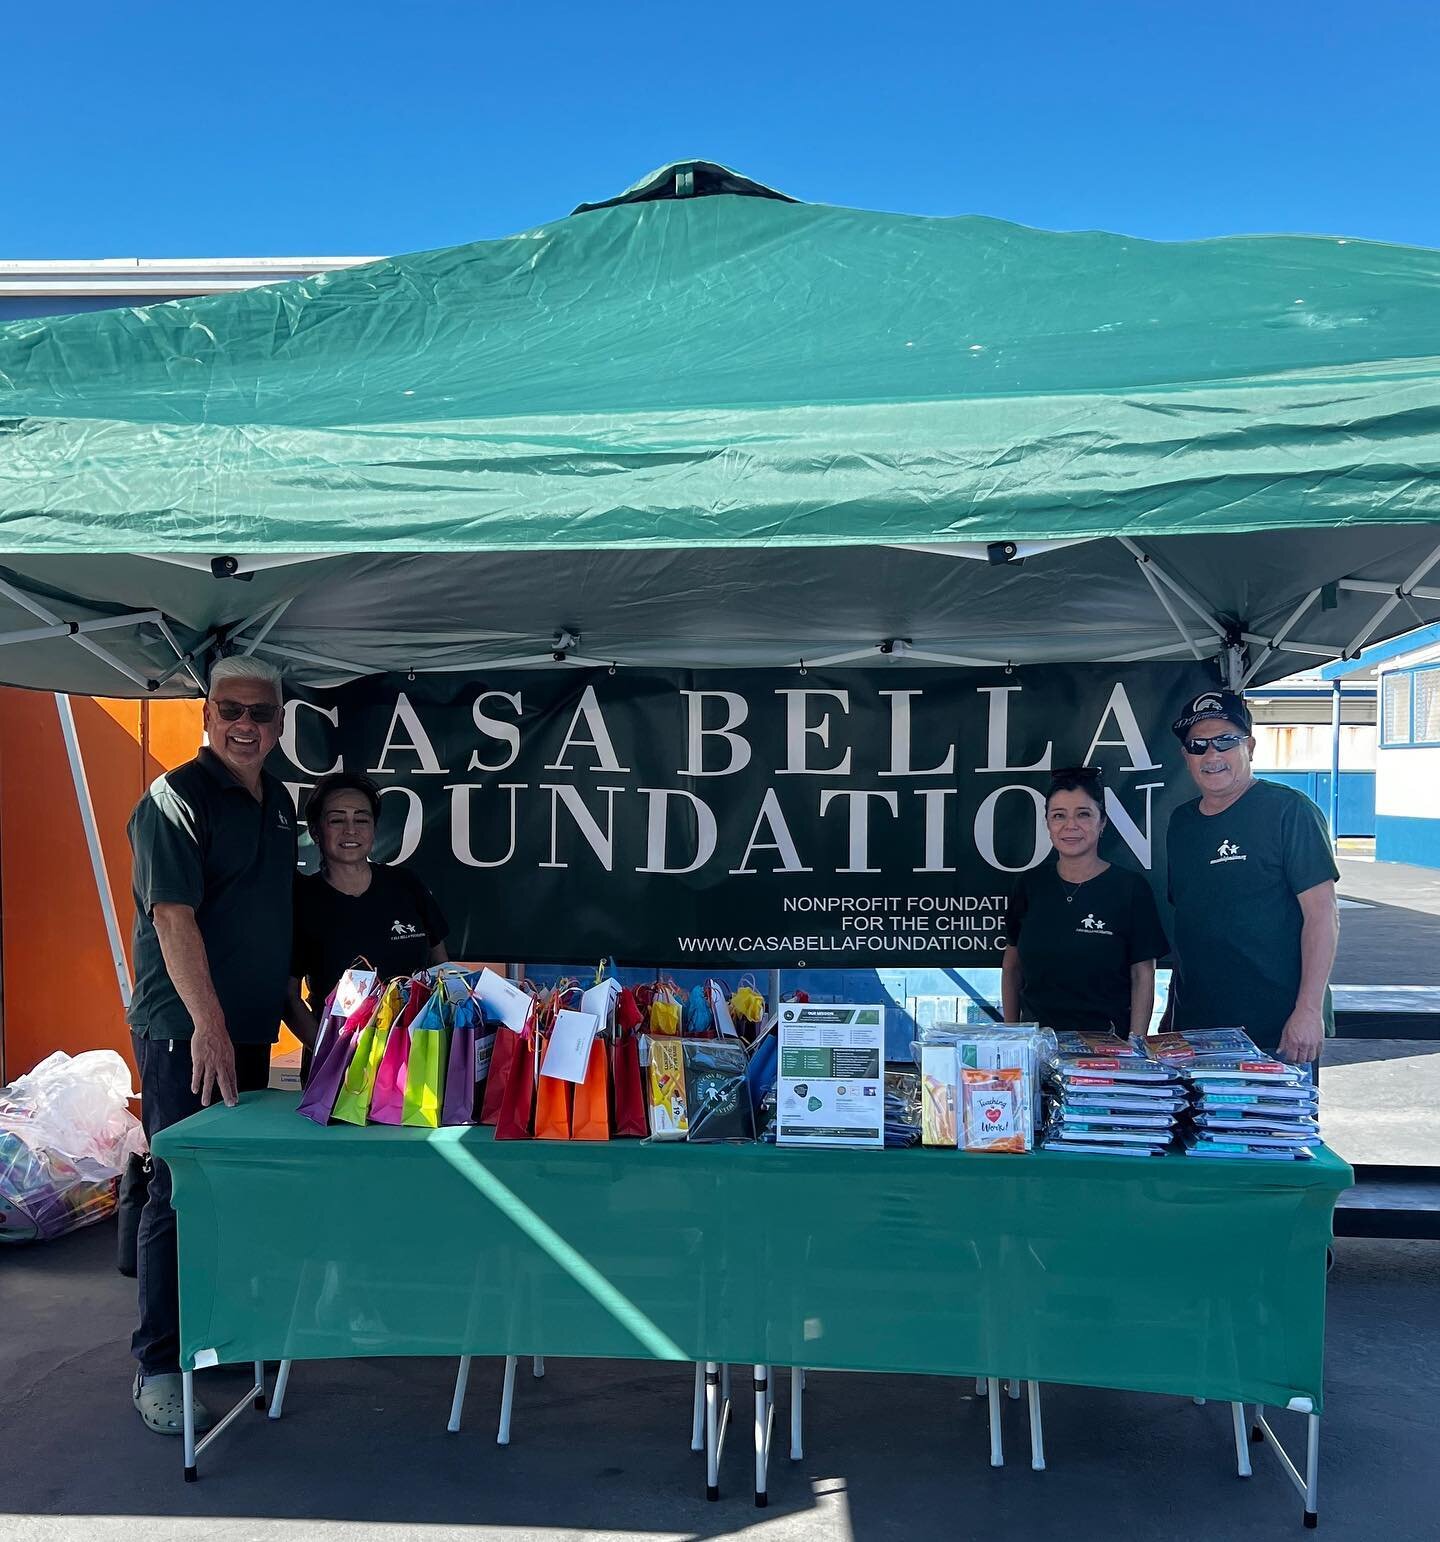 🎒✏️ A day of giving! On Wednesday, September 12th, the Casa Bella Foundation spread smiles at Harbor City Elementary. We handed out 150 backpacks filled with school supplies and art kits to eager students. 📚✨ Not forgetting our amazing teachers, we